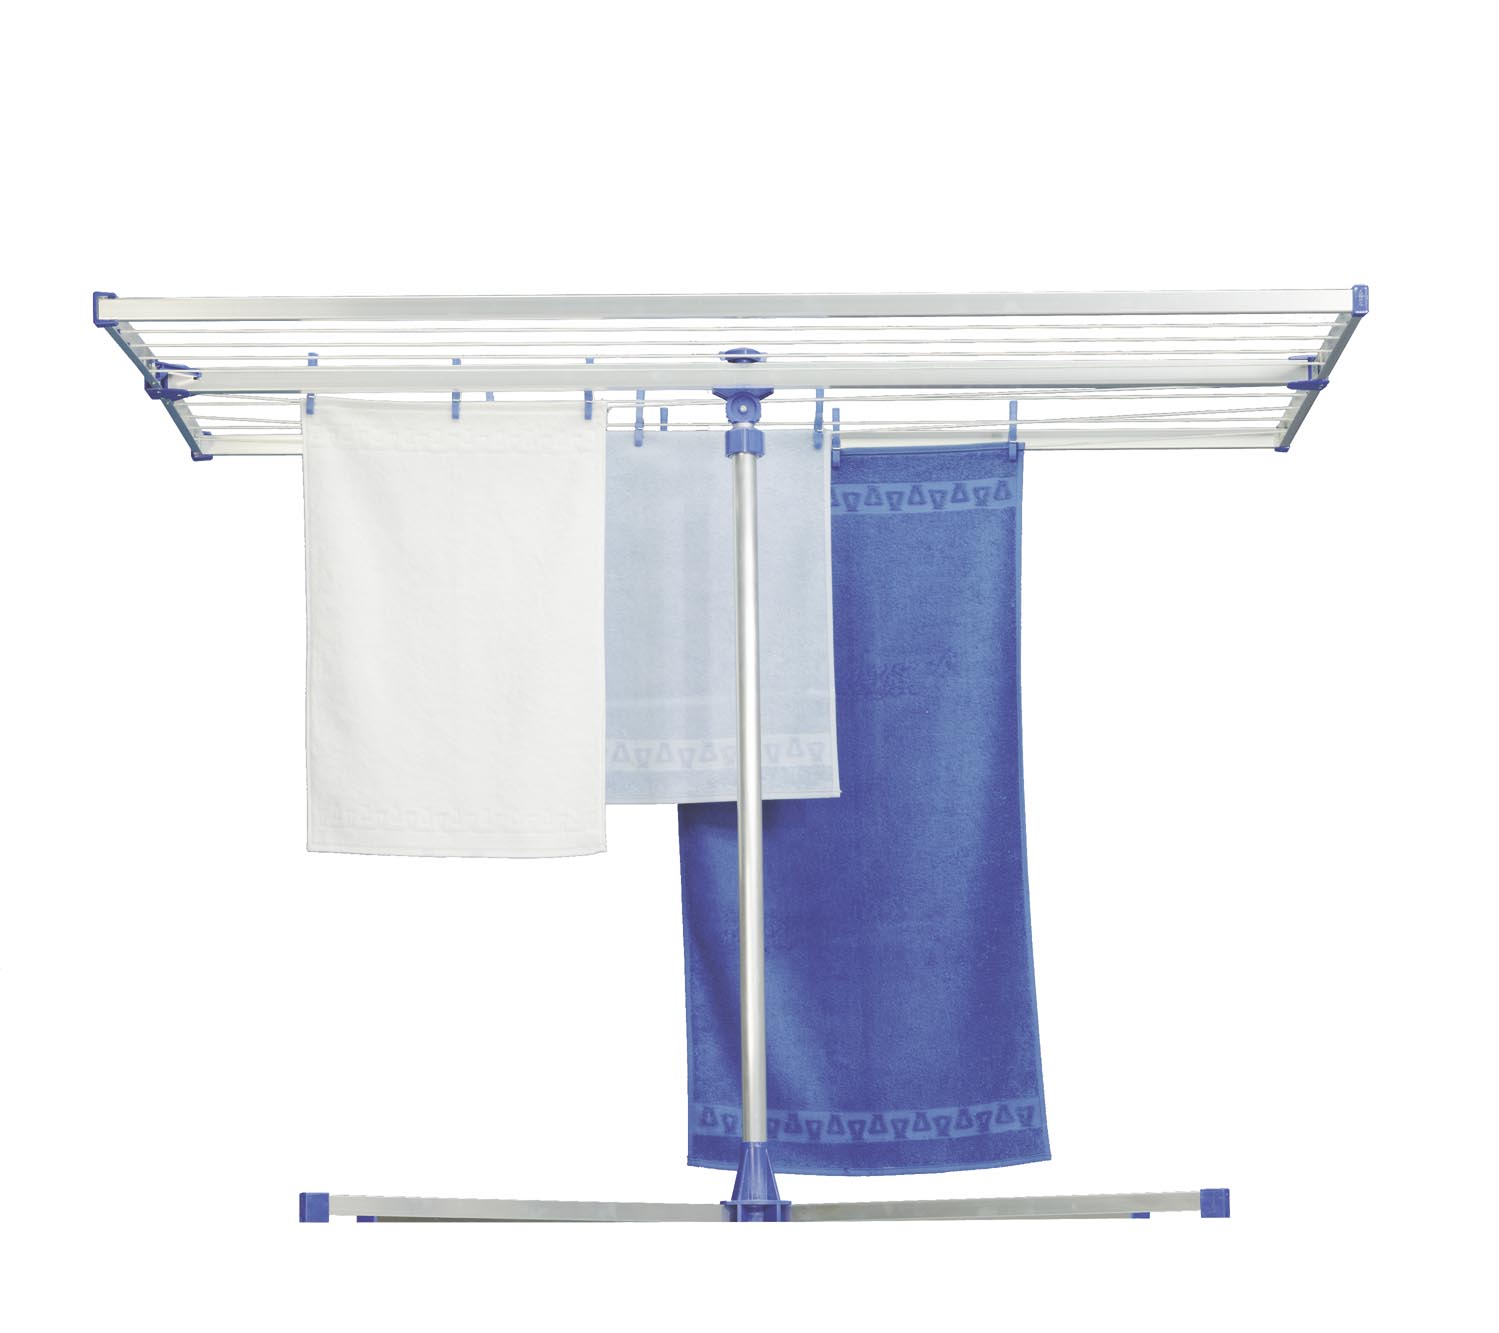 https://urbanclotheslines.com/image.php?type=T&id=50194